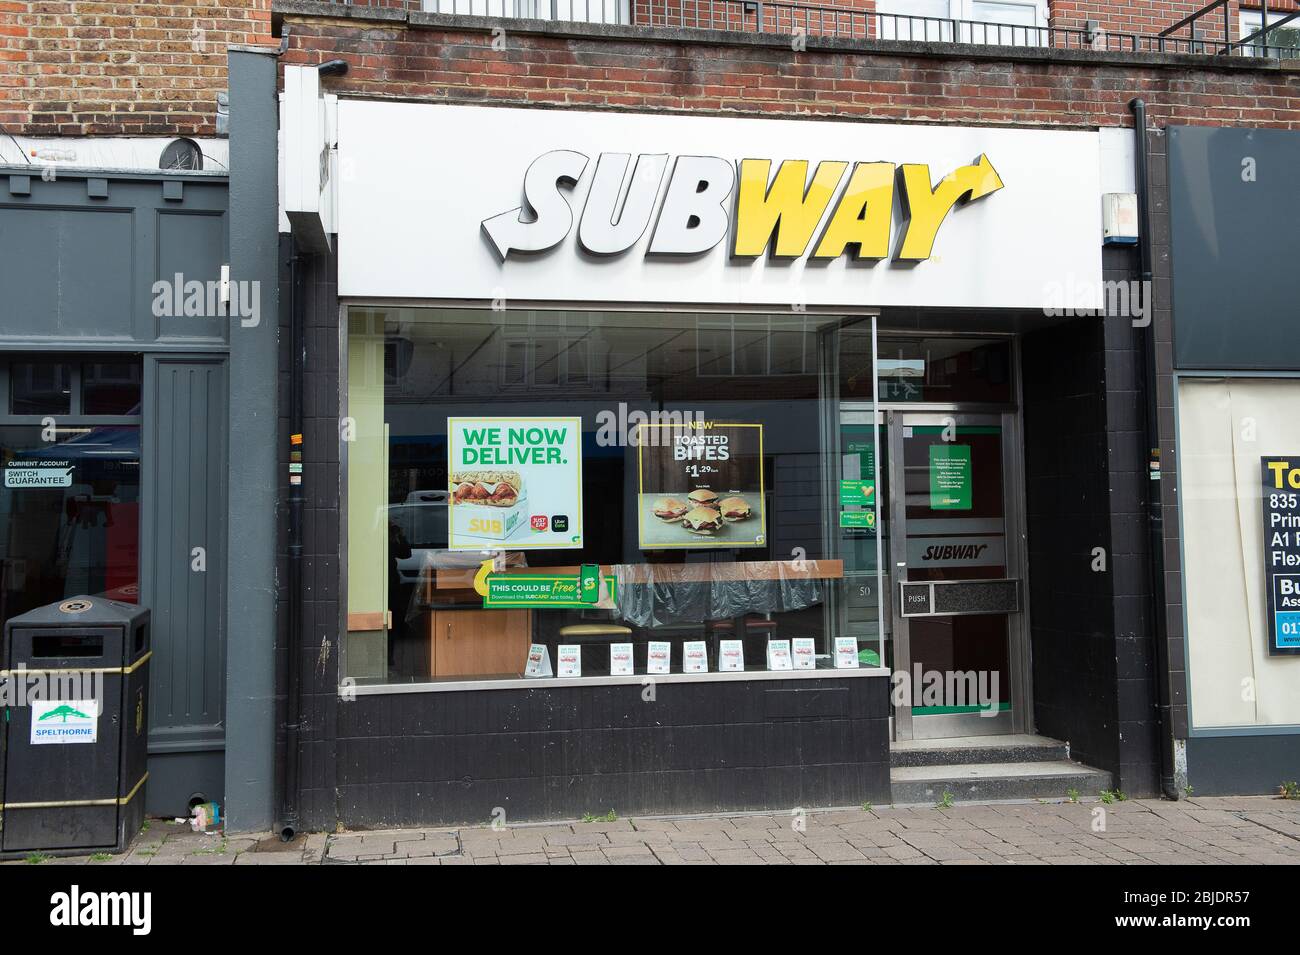 Staines-upon-Thames, Surrey, UK. 29th April, 2020. Shoppers were out on market day in Staines today getting their essential food shopping and going to the bank. Many of the shops and restaurants remain temporarily closed during the Coronavirus Pandemic Lockdown including the Subway sandwich bar. Credit: Maureen McLean/Alamy Stock Photo